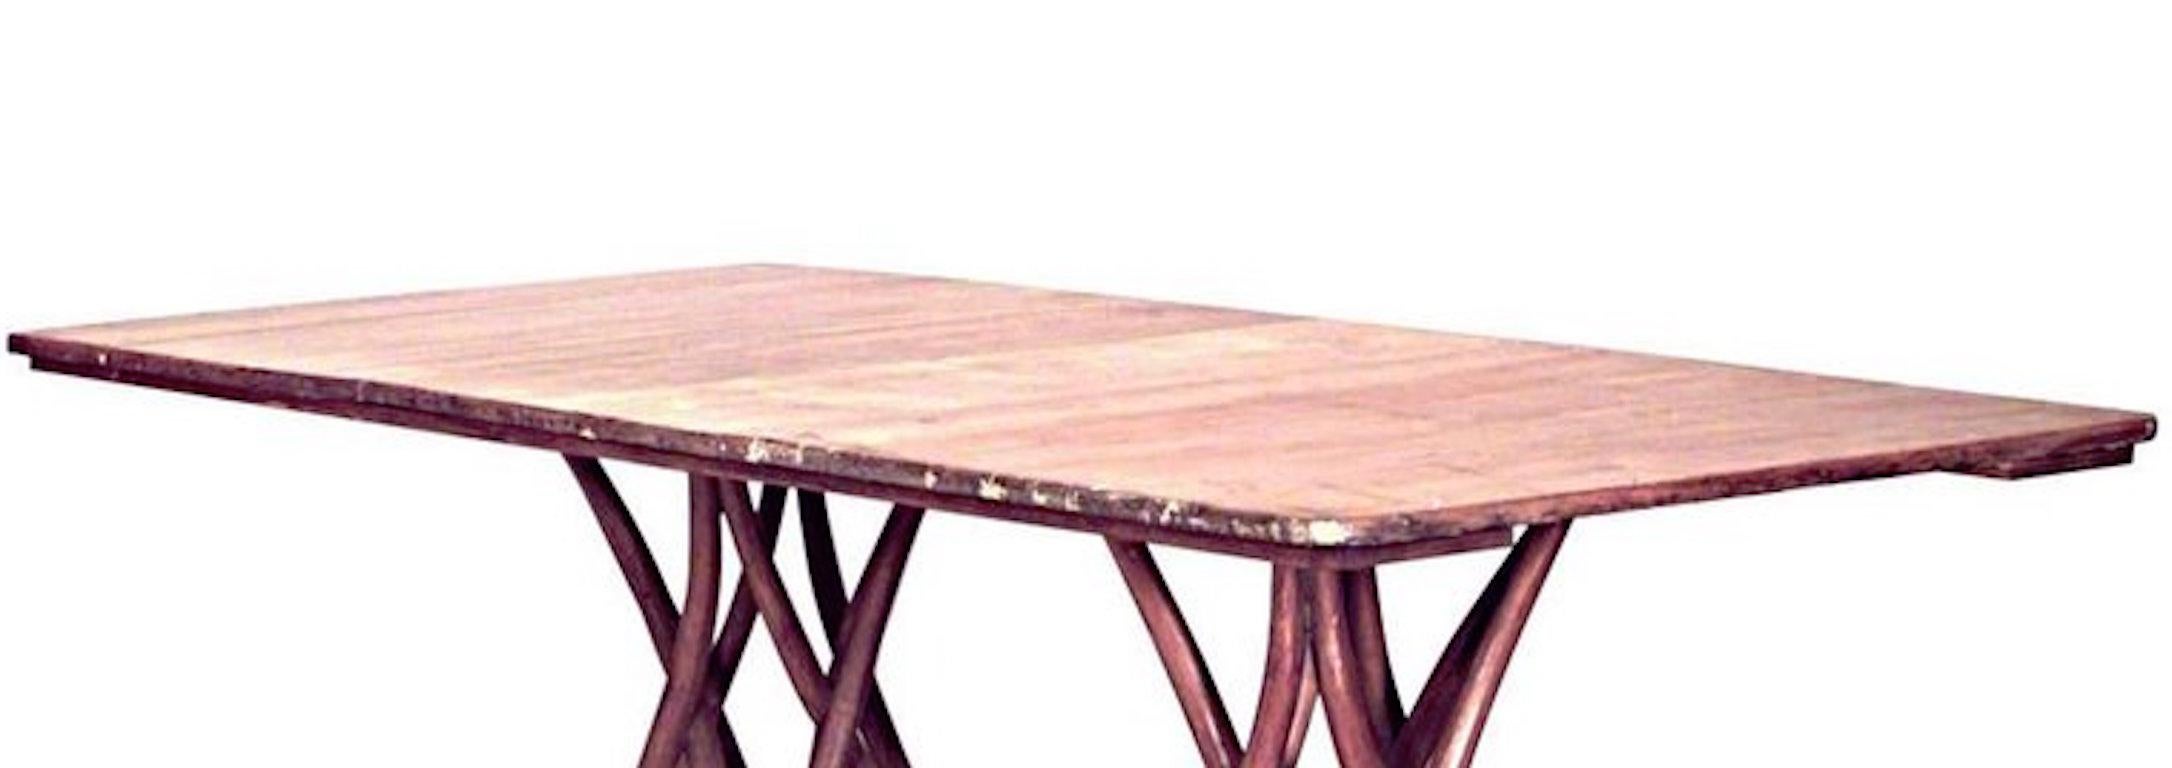 Modern Bentwood Stripped Dining Table For Sale